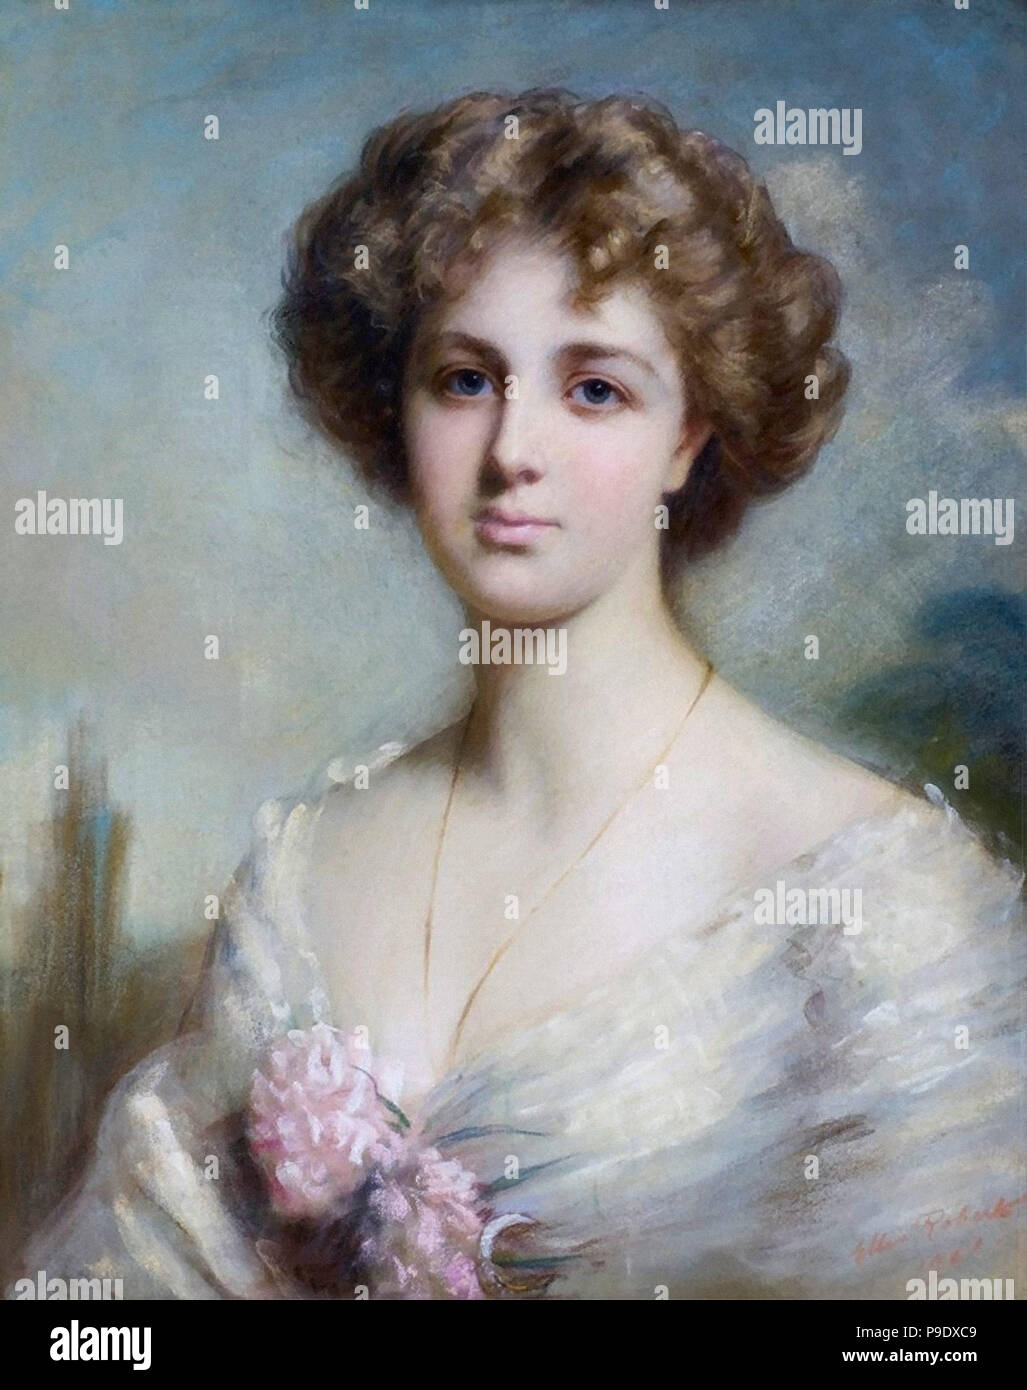 Roberts  Ellis William - Lady Edith Helen Chaplin  Marchioness of Londonderry Stock Photo